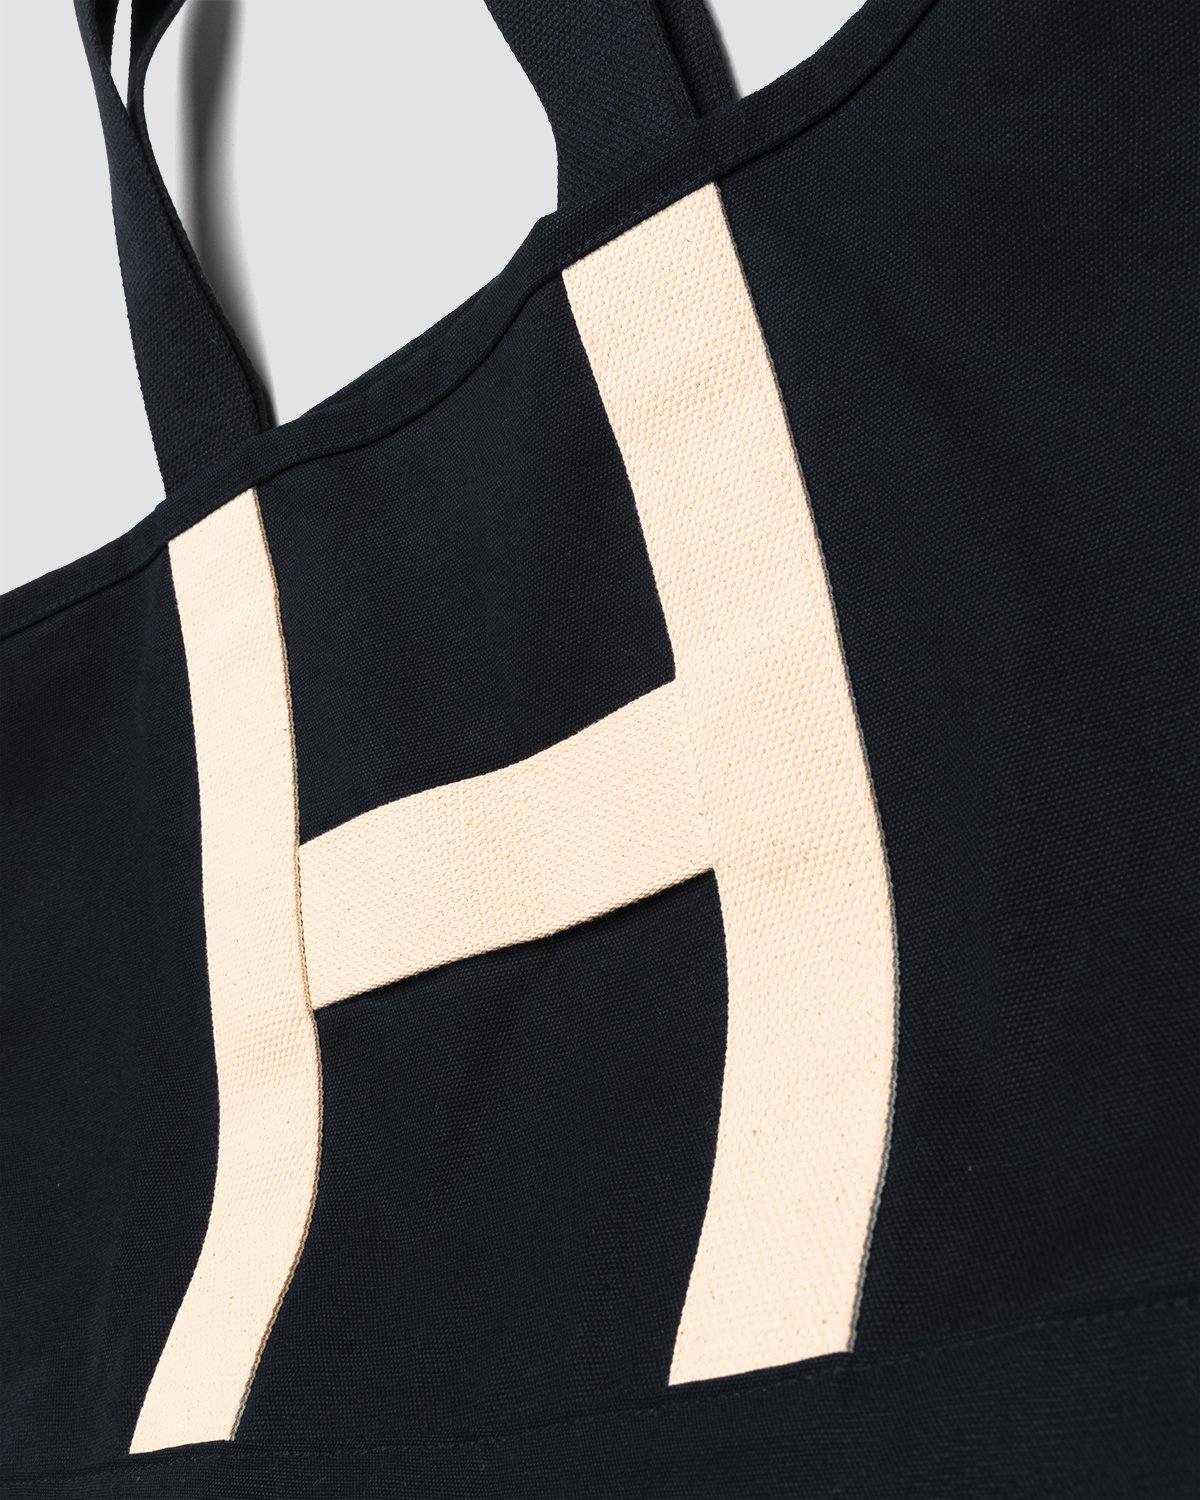 Highsnobiety - Heavy Canvas Large Shopper Tote Black - Accessories - Black - Image 3